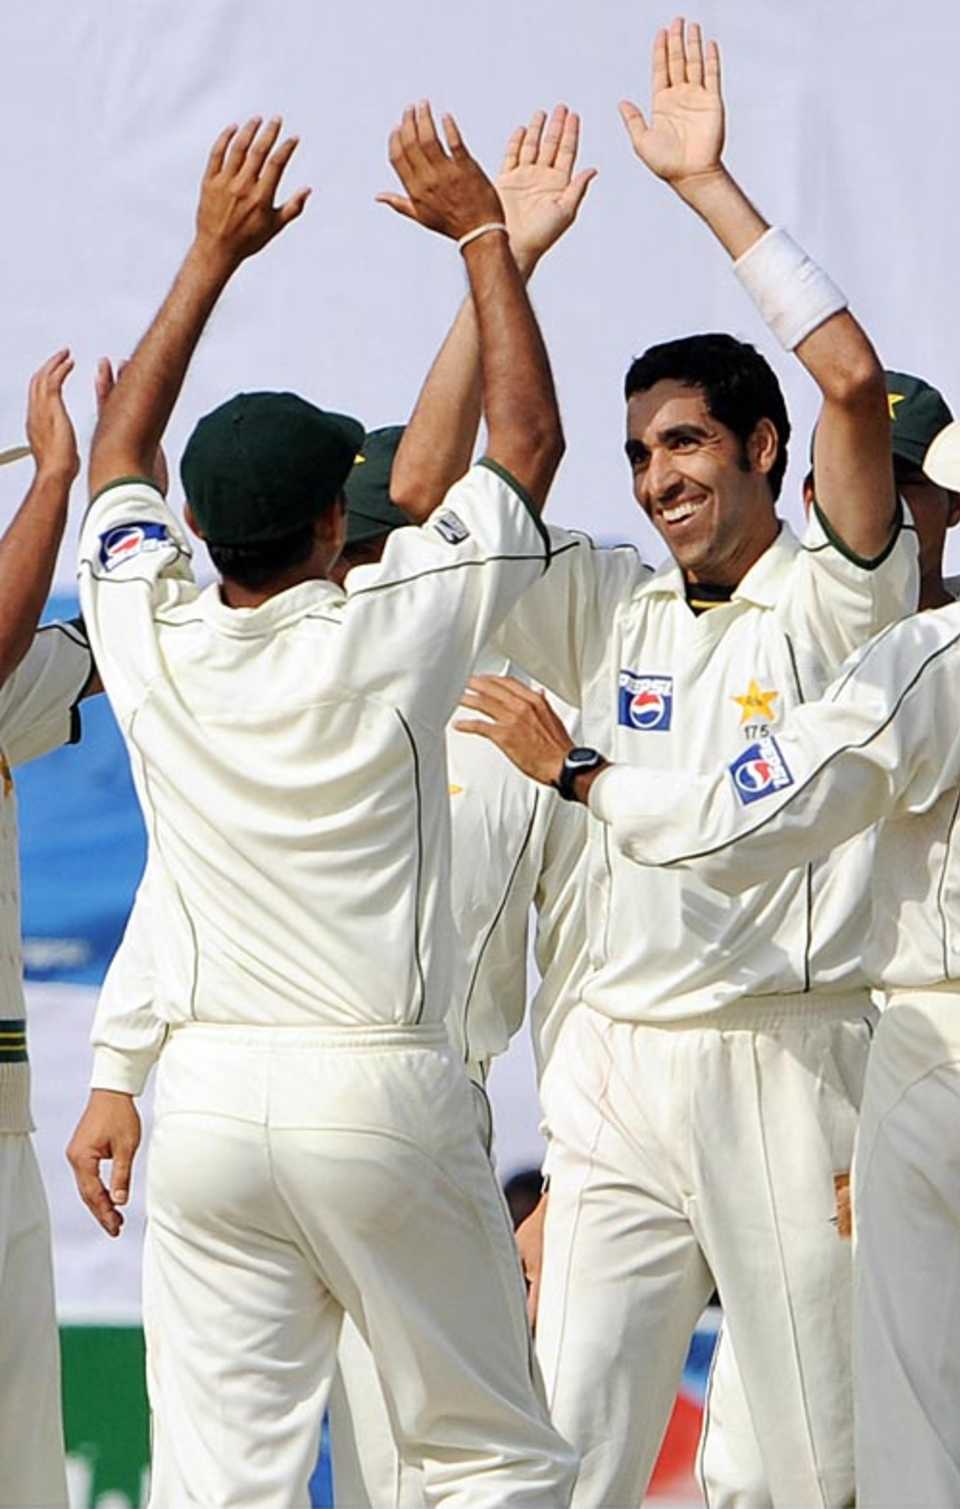 Umar Gul is congratulated by team-mates after picking up his sixth wicket, Pakistan v Sri Lanka, 2nd Test, 2nd day, March 2, 2009